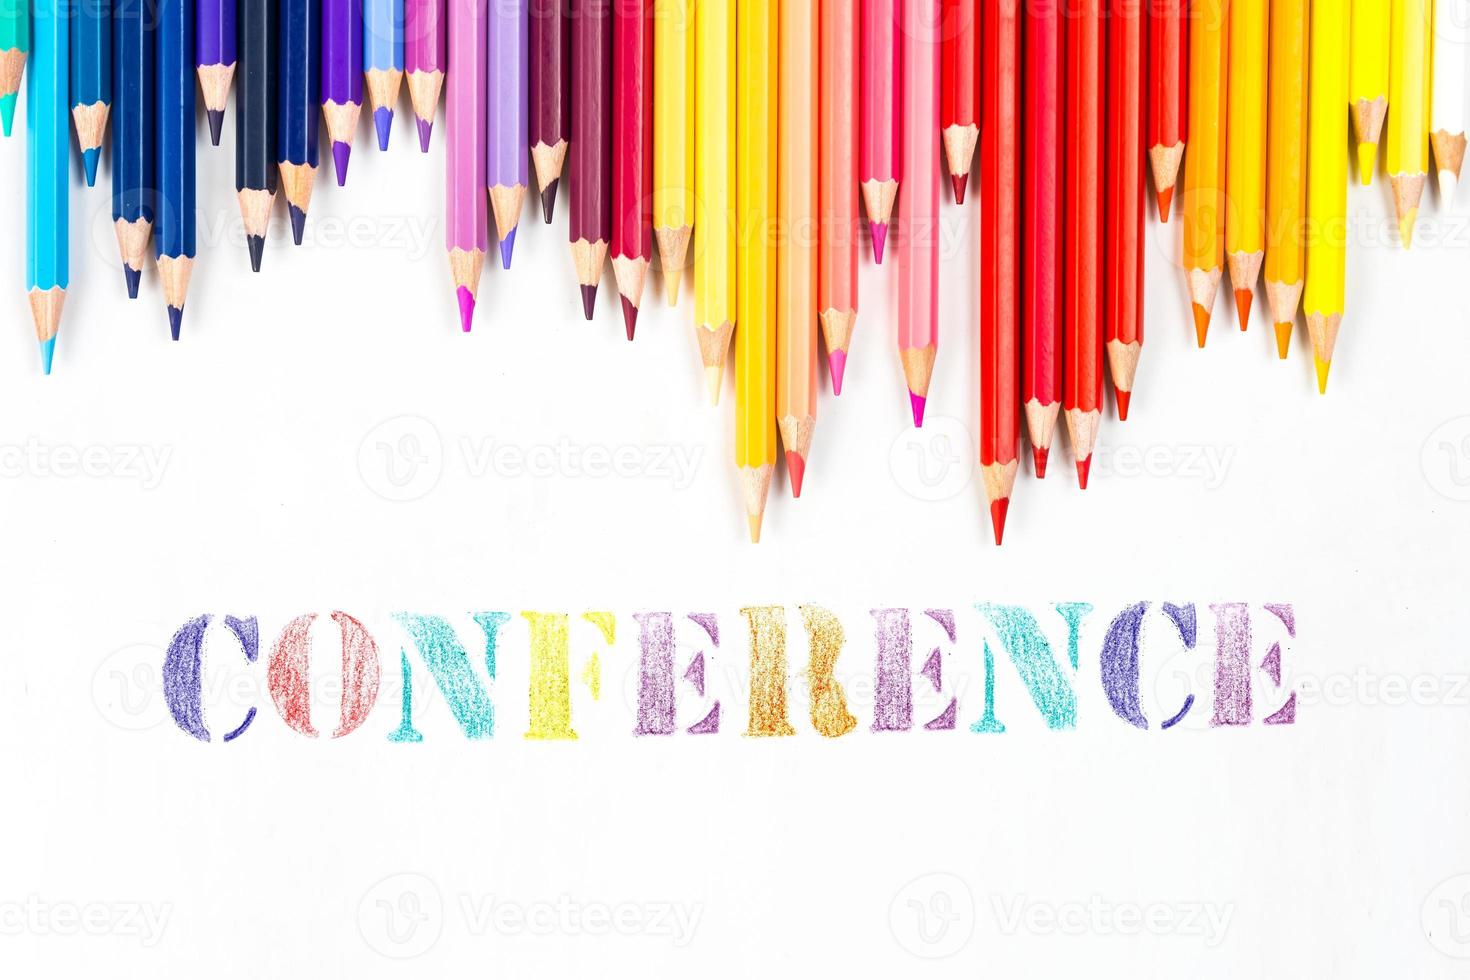 Multi-colored wooden sticks Wooden colouring pencils and Conference on white background photo